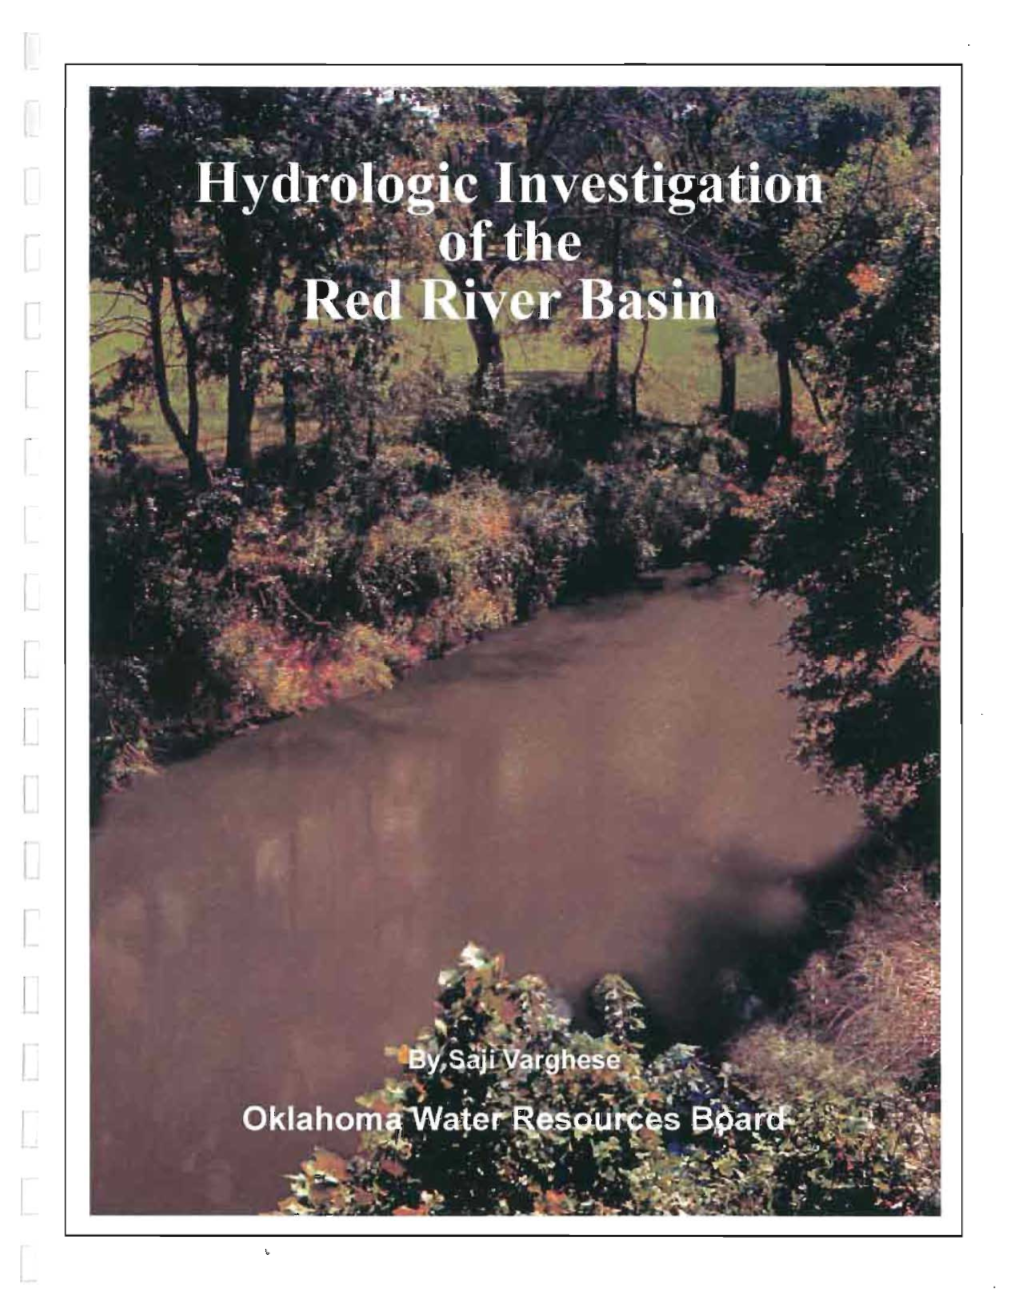 Hydrologic Investigation of the Red River Basin